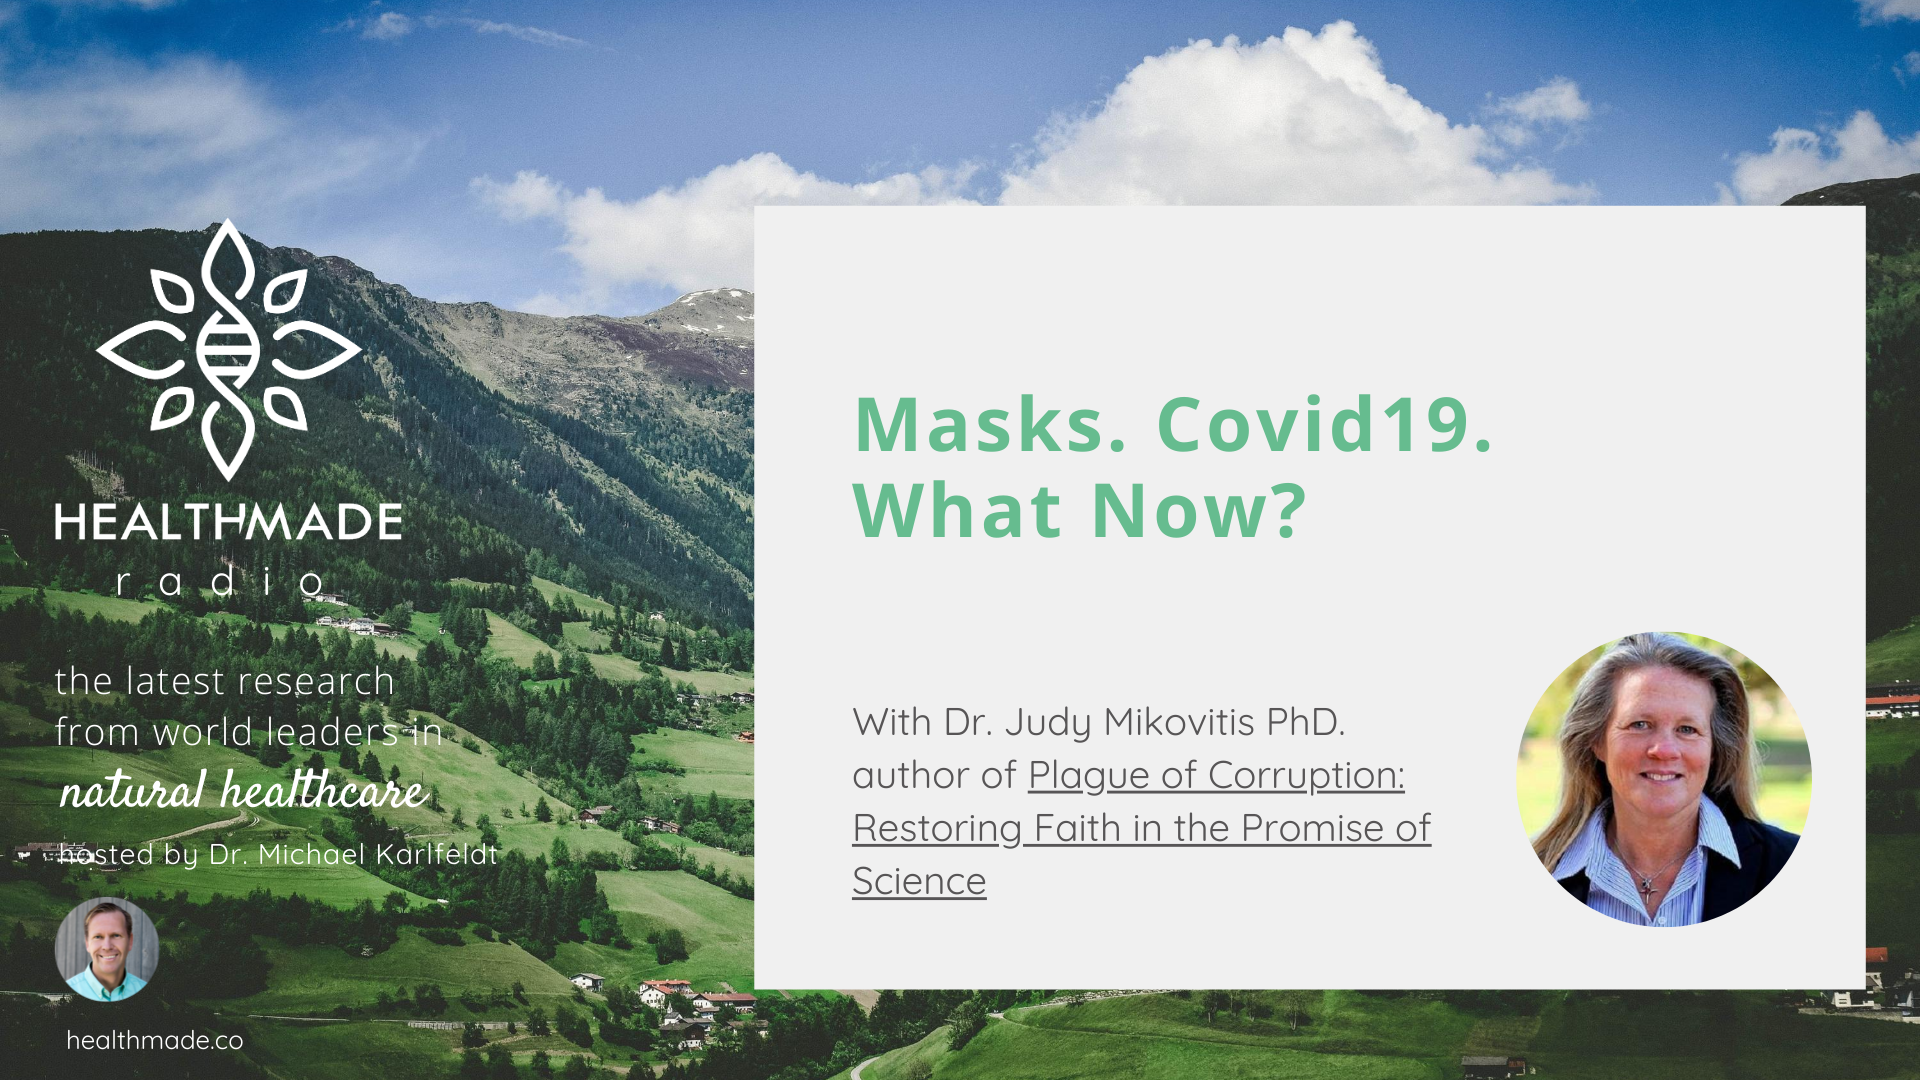 What Now? Interview with Dr. Judy Mikovitis